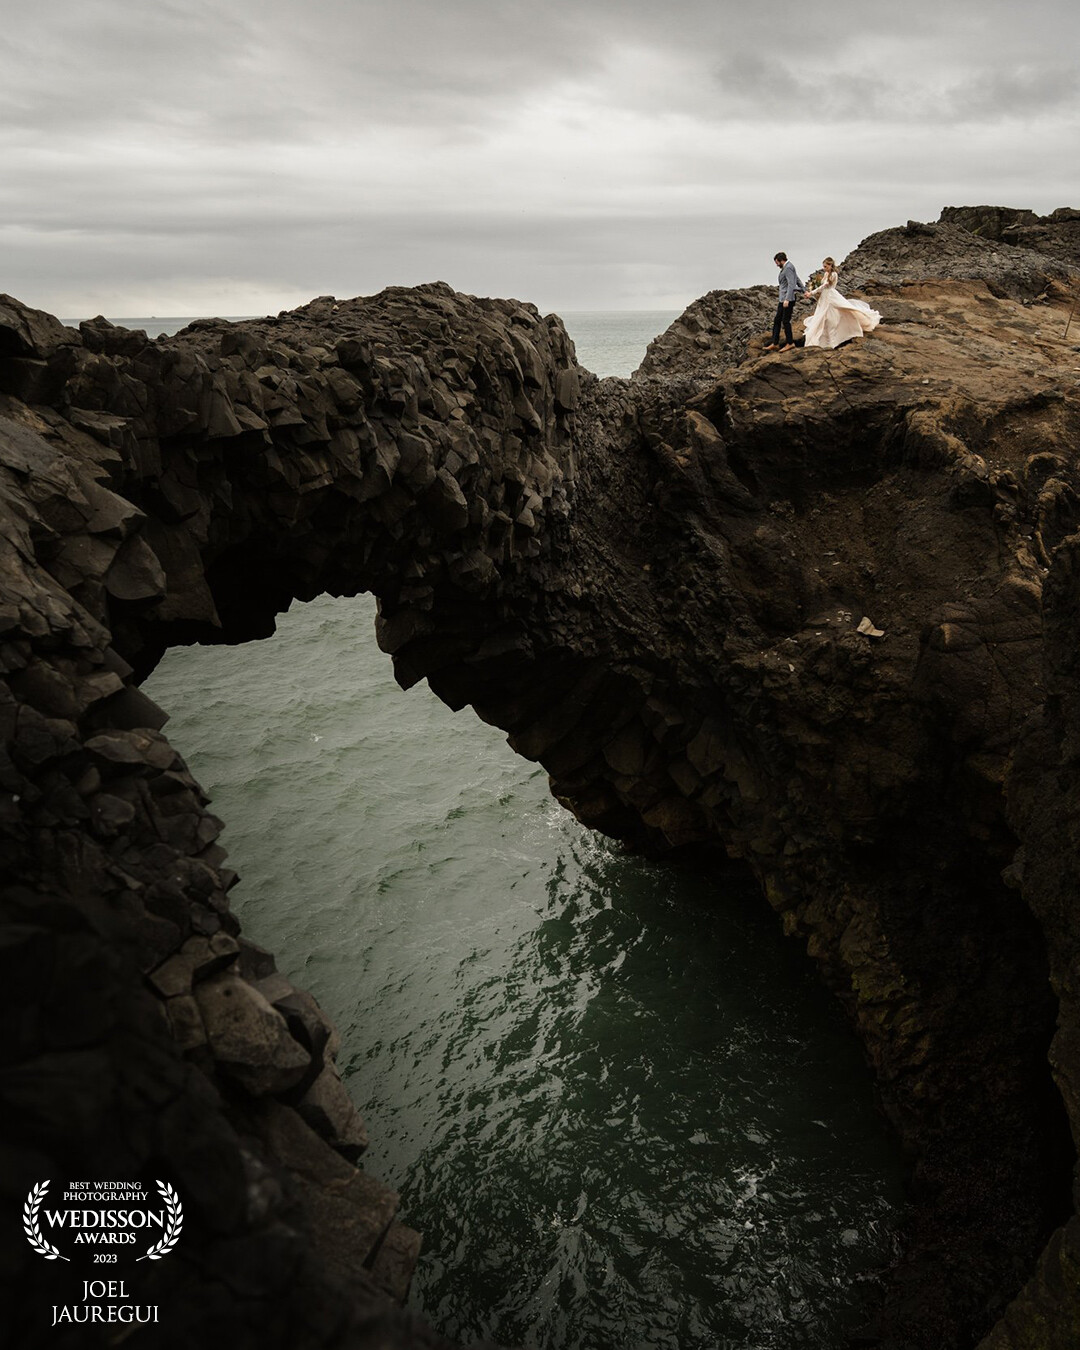 This was one of my favorite Adventure Elopements in Iceland. I was in Iceland filming and photographing some promotional work for my friend, Tyler and a few days prior he had some elopements that I second shot for him. This was shot near Black Sand Beach and as you can see if you angle yourself right, you get this awesome view of the natural stone arch.